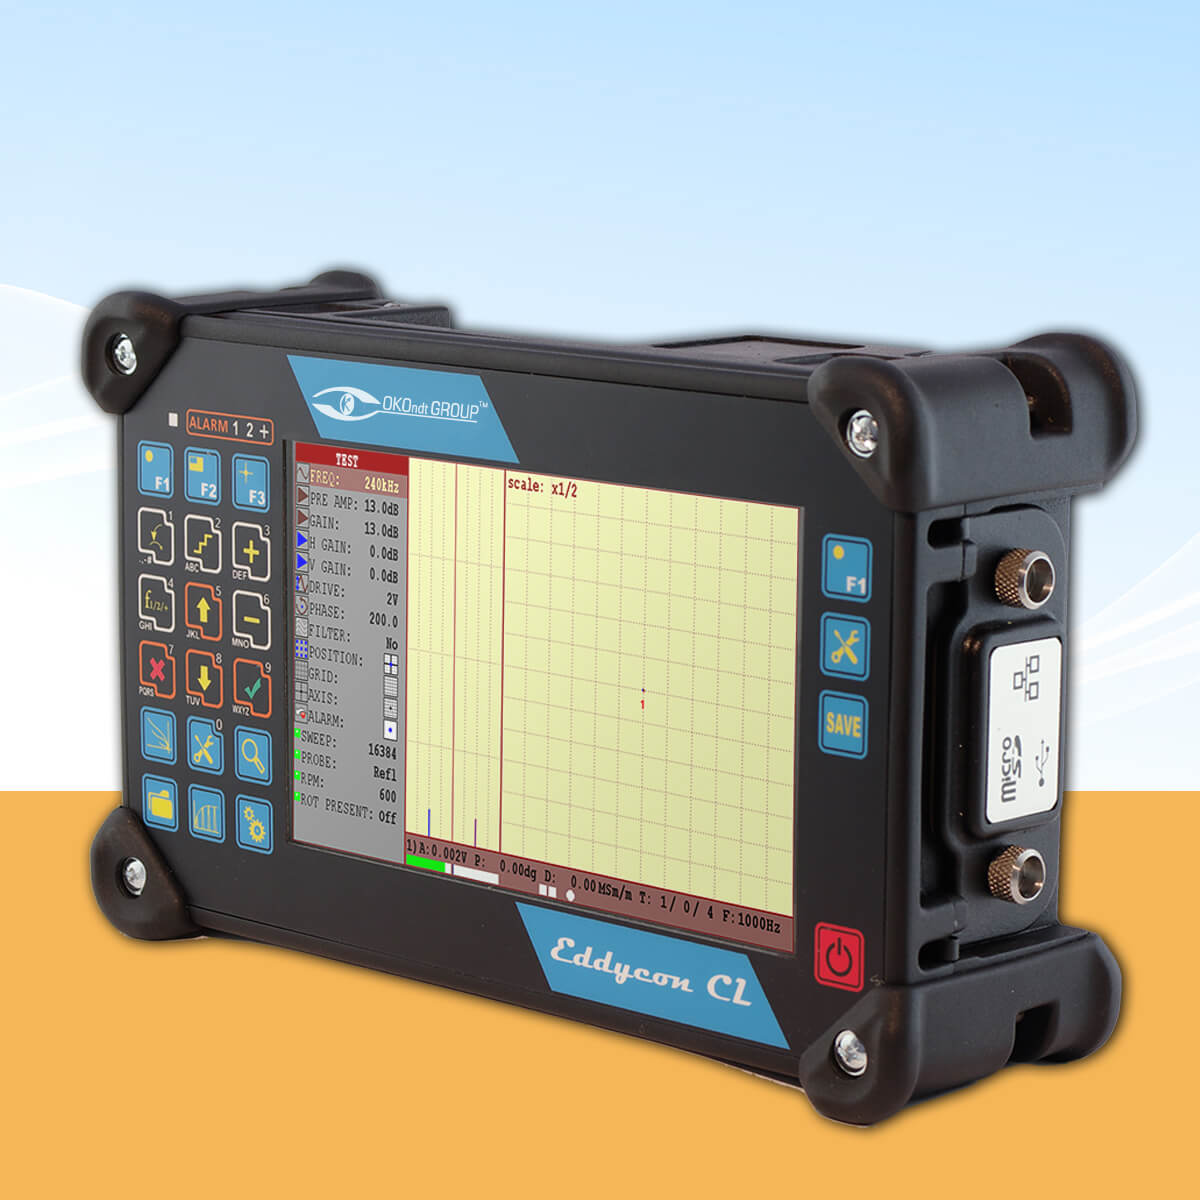 Portable eddy current flaw detector with a large screen Eddycon CL, side view